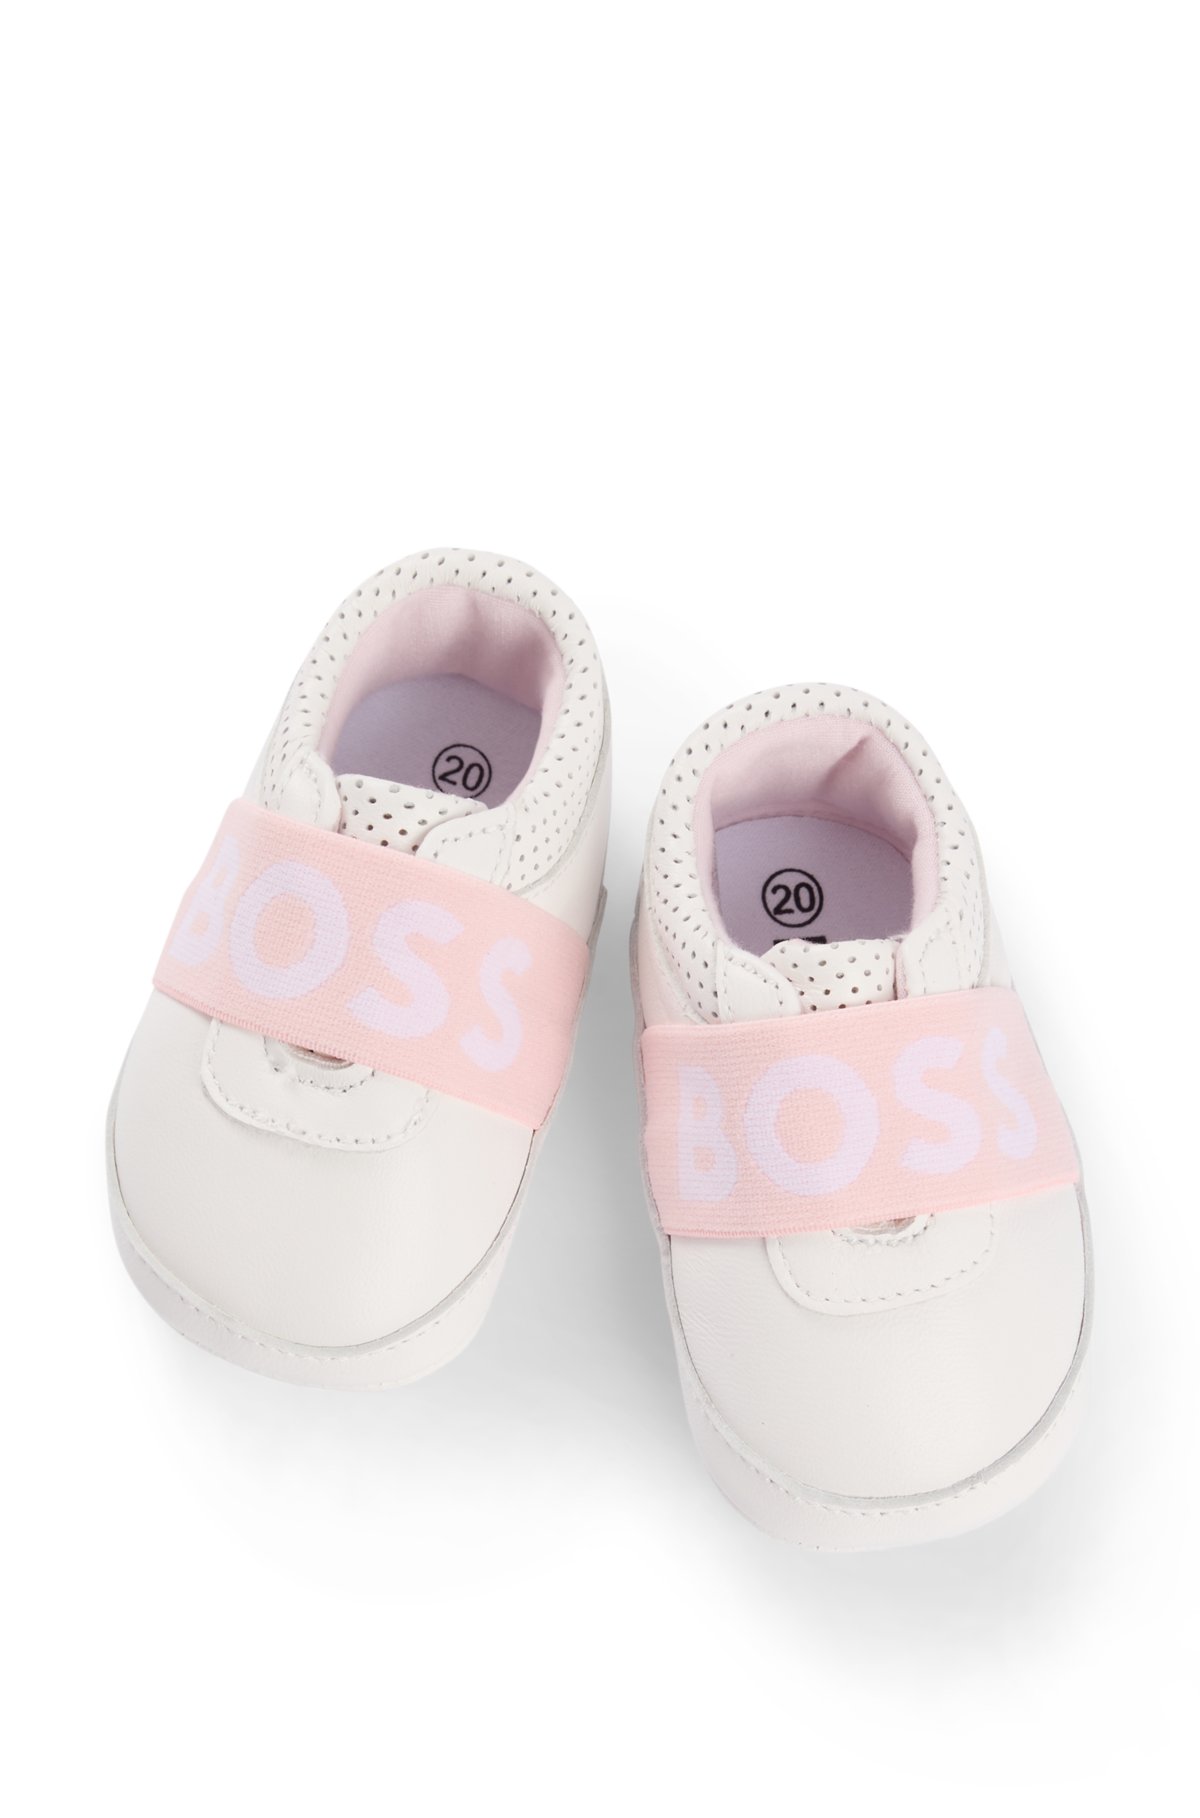 Gift-boxed leather shoes for babies, White